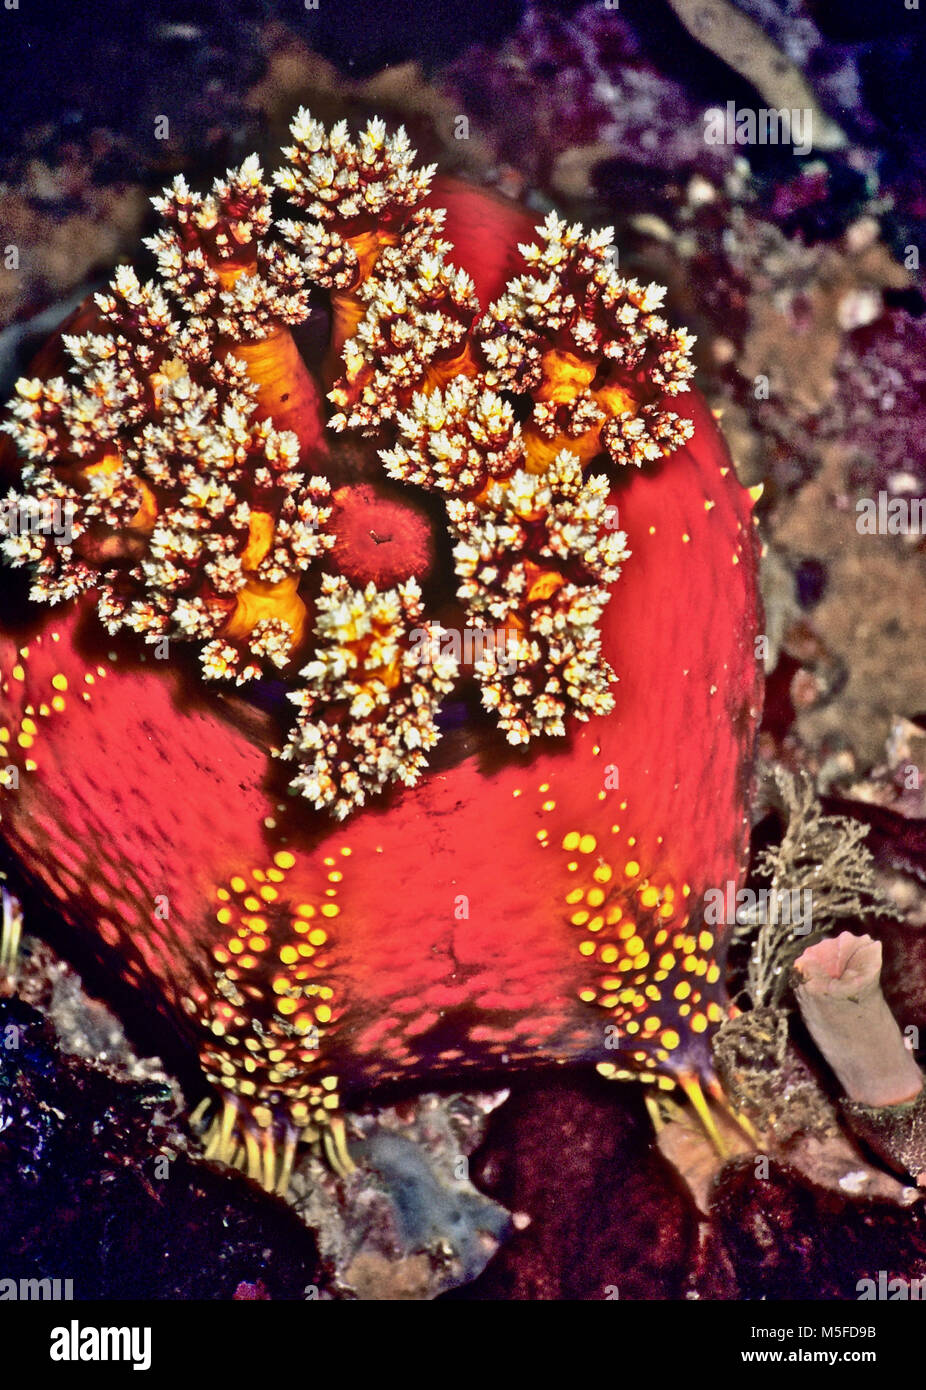 The red colouring, round shape and size of this holothurian (Pseudocolochirus violaceus: 10 cms.) has resulted in its common name of sea apple. As with starfish and sea urchins, this species moves slowly on the substrate by means of its many hydraulically operated tube feet. To move more swiftly - for example if threatened - it has the ability to double its size by taking in sea water and then launch itself into the current. It feeds on microplankton, usually at night, using white tentacles around its central mouth to capture its prey. Photographed at dusk in Horseshoe Bay, Rinca, Indonesia. Stock Photo